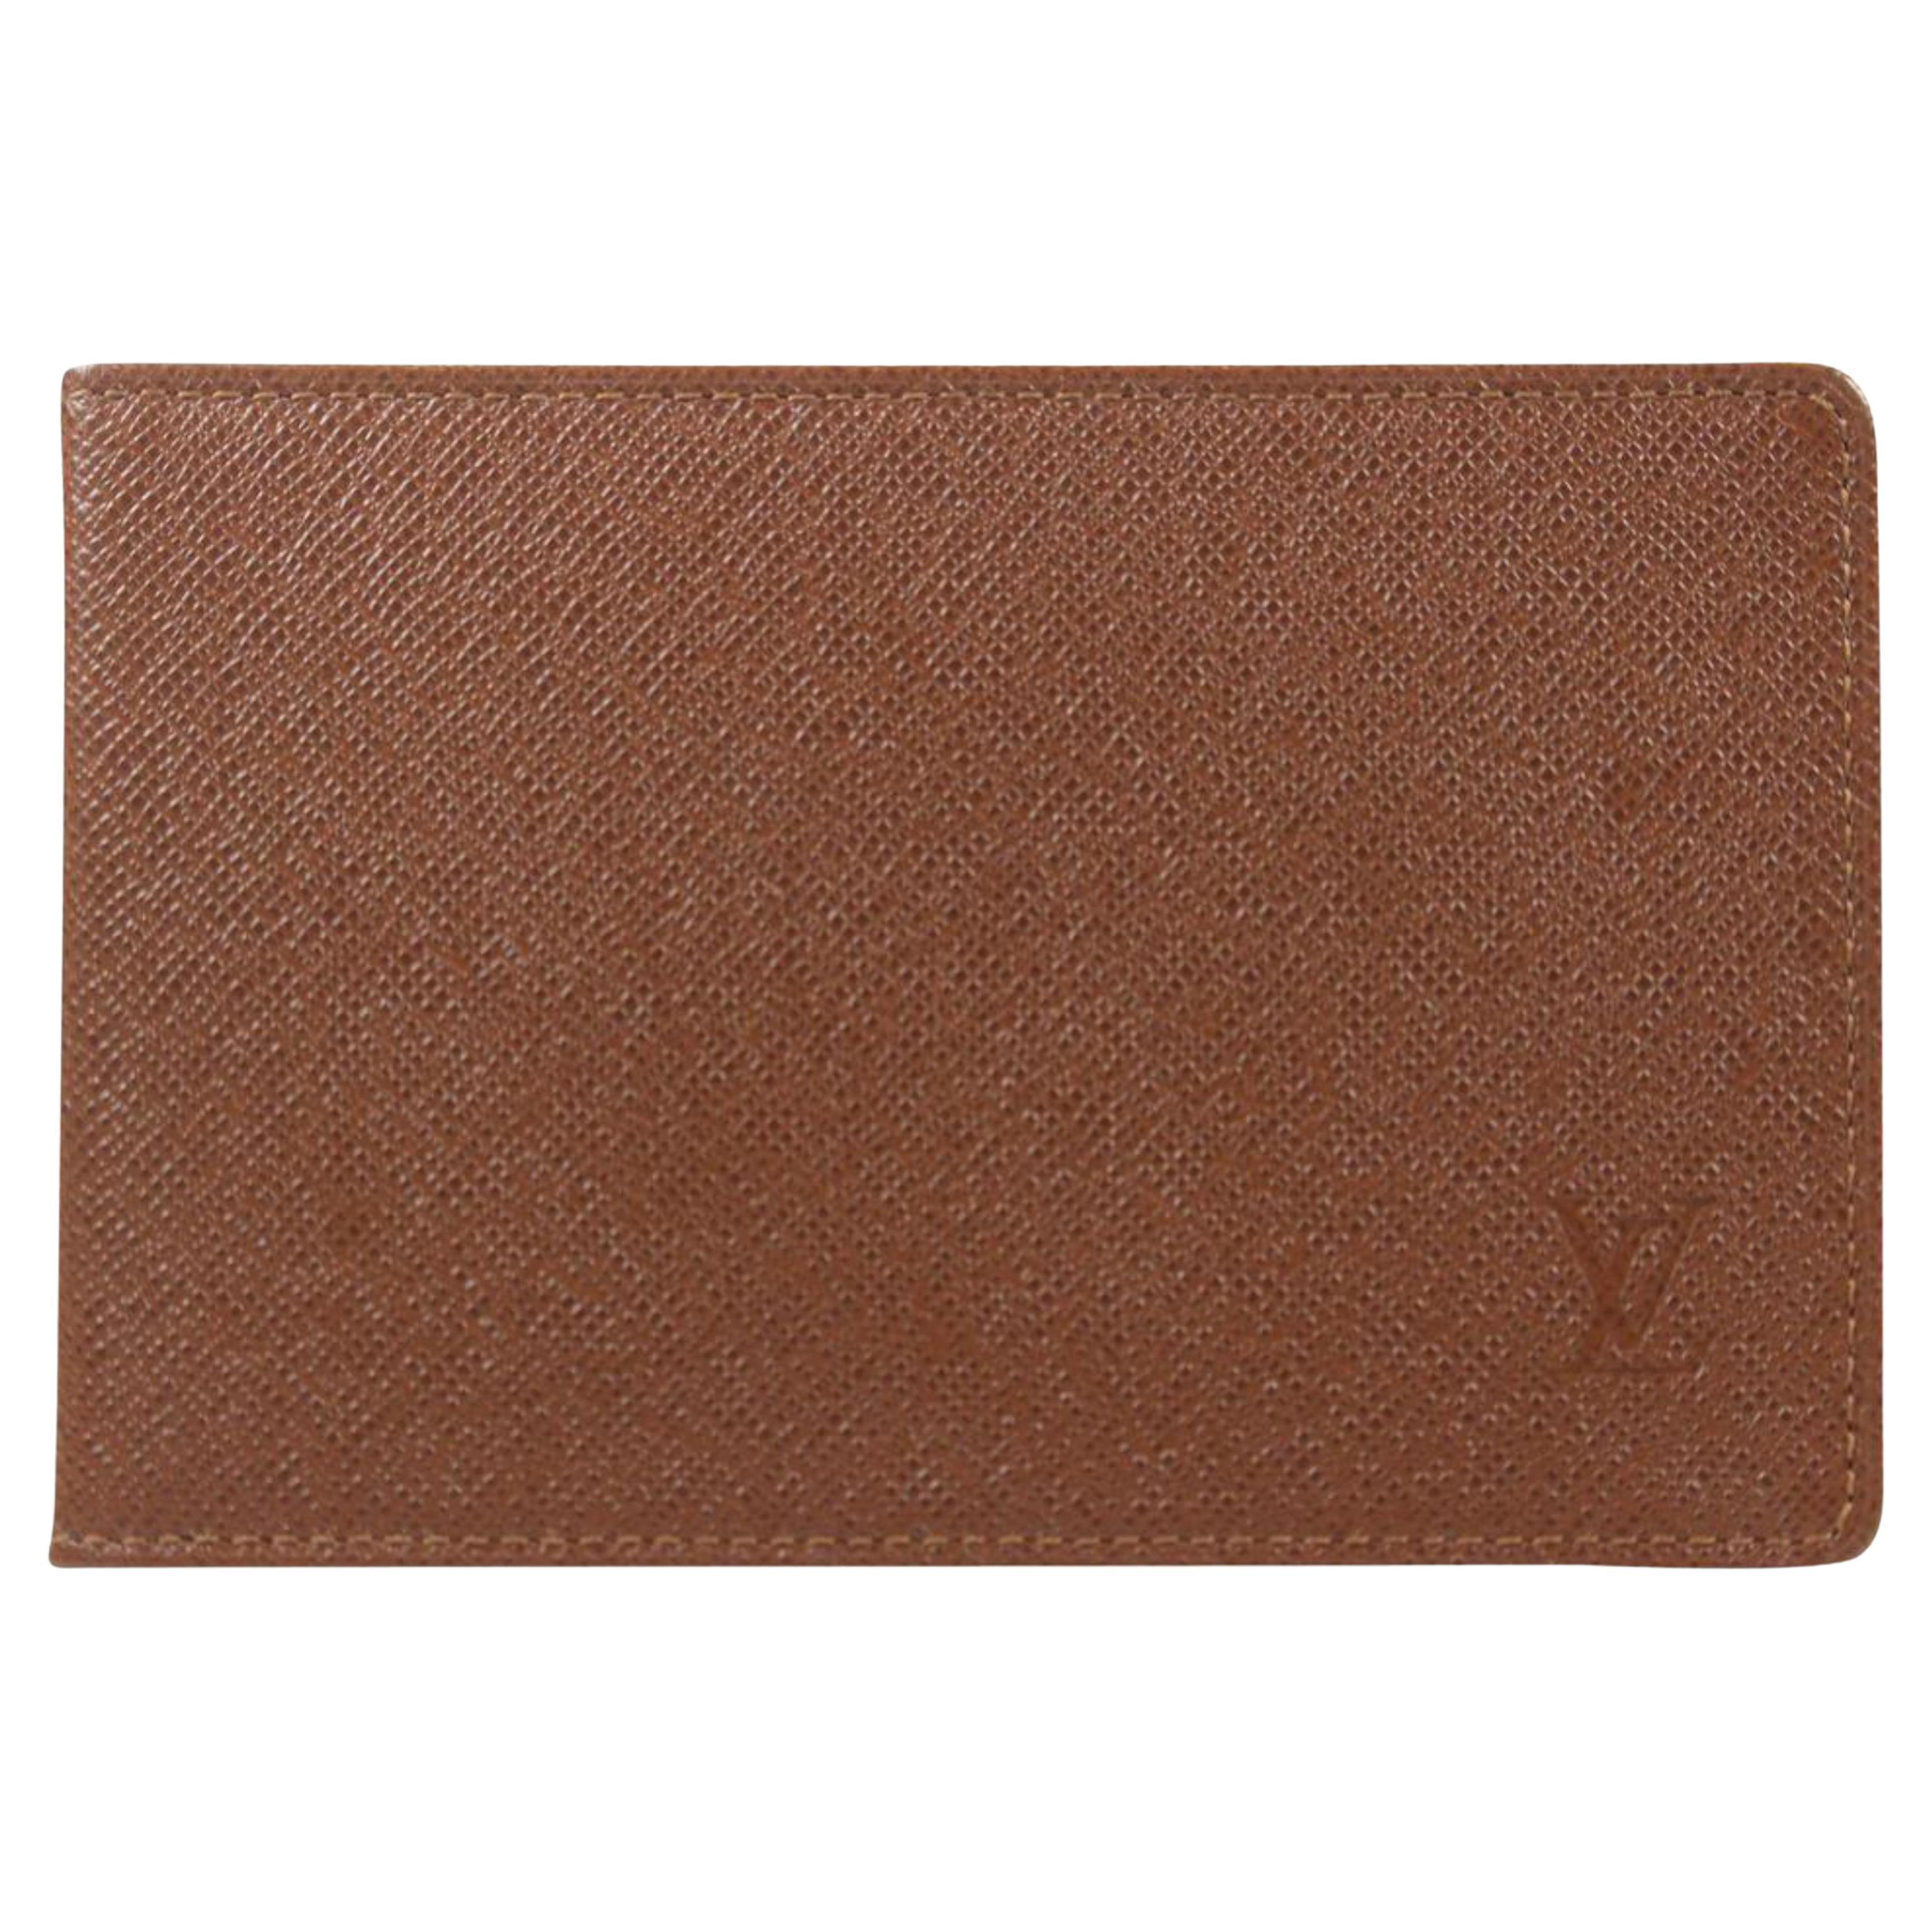 What is a card wallet?